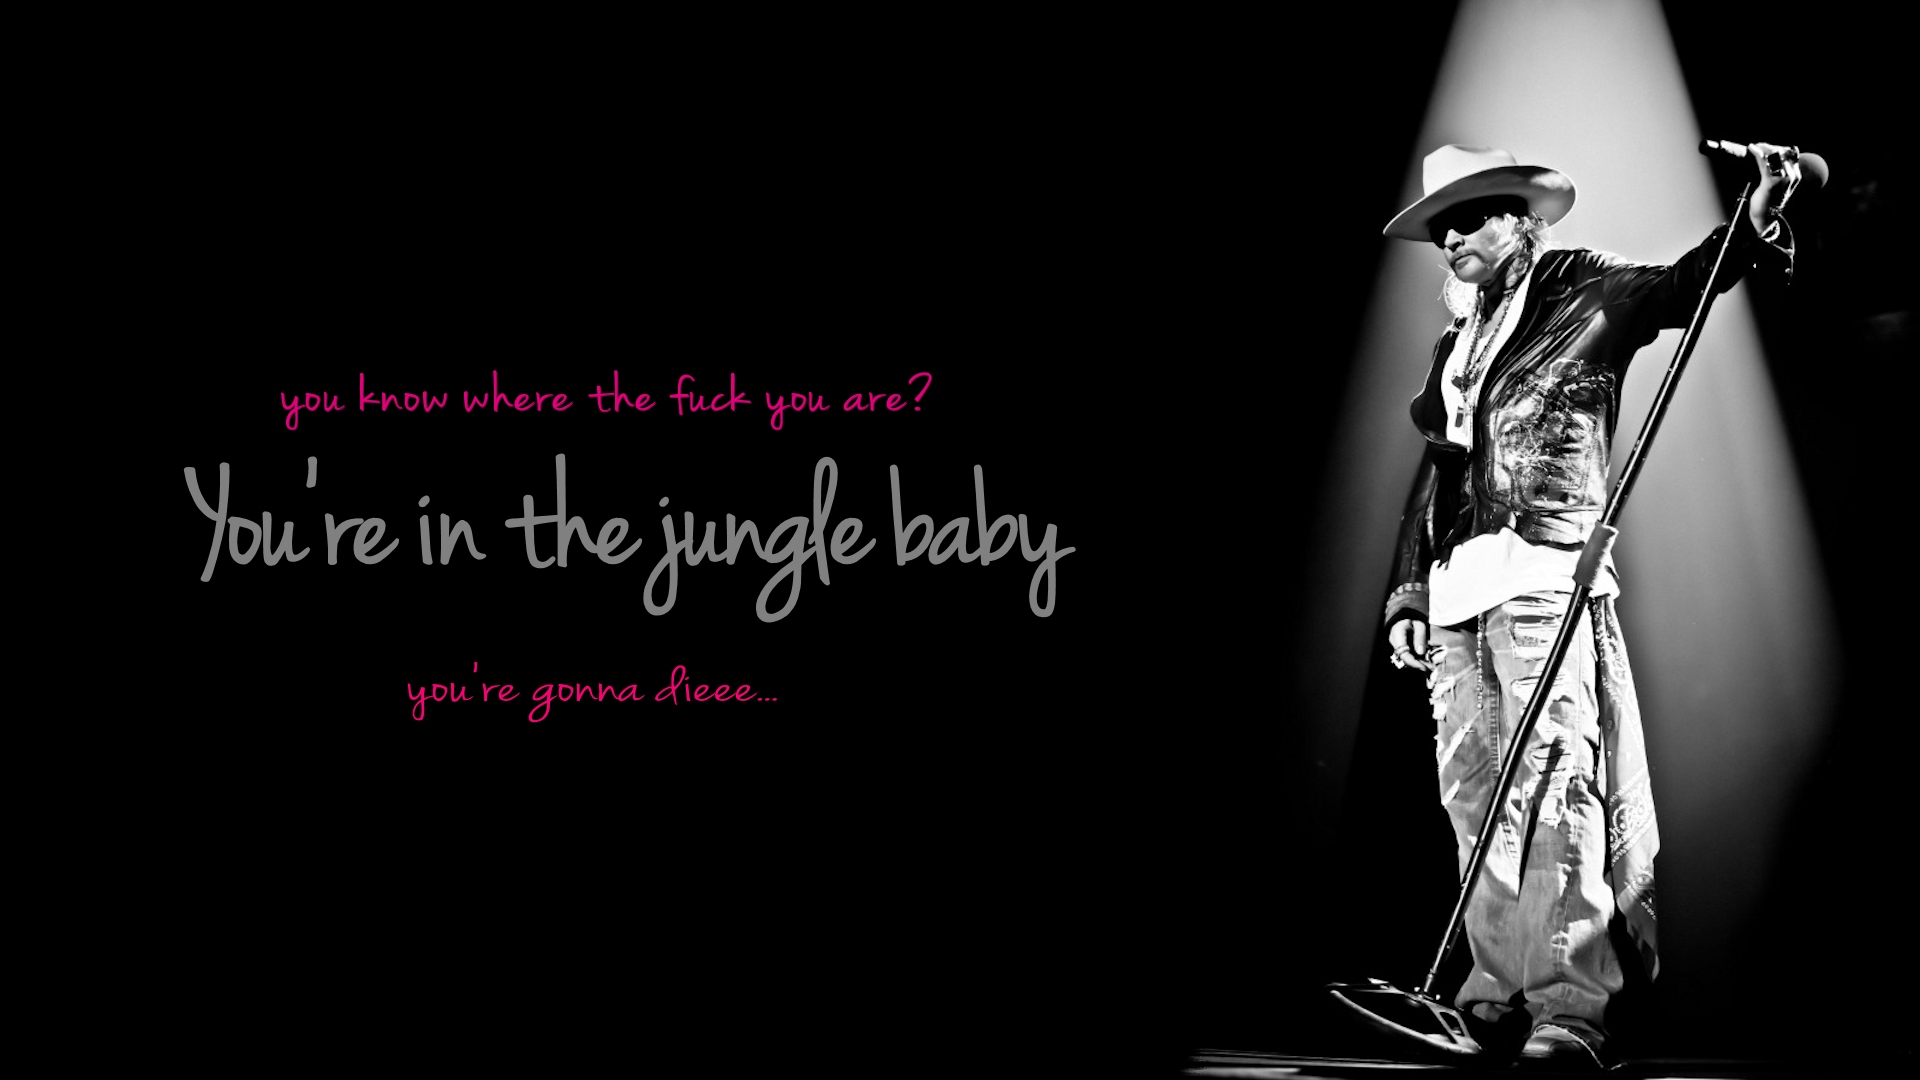 Wele To The Jungle Axl Rose Wallpaper